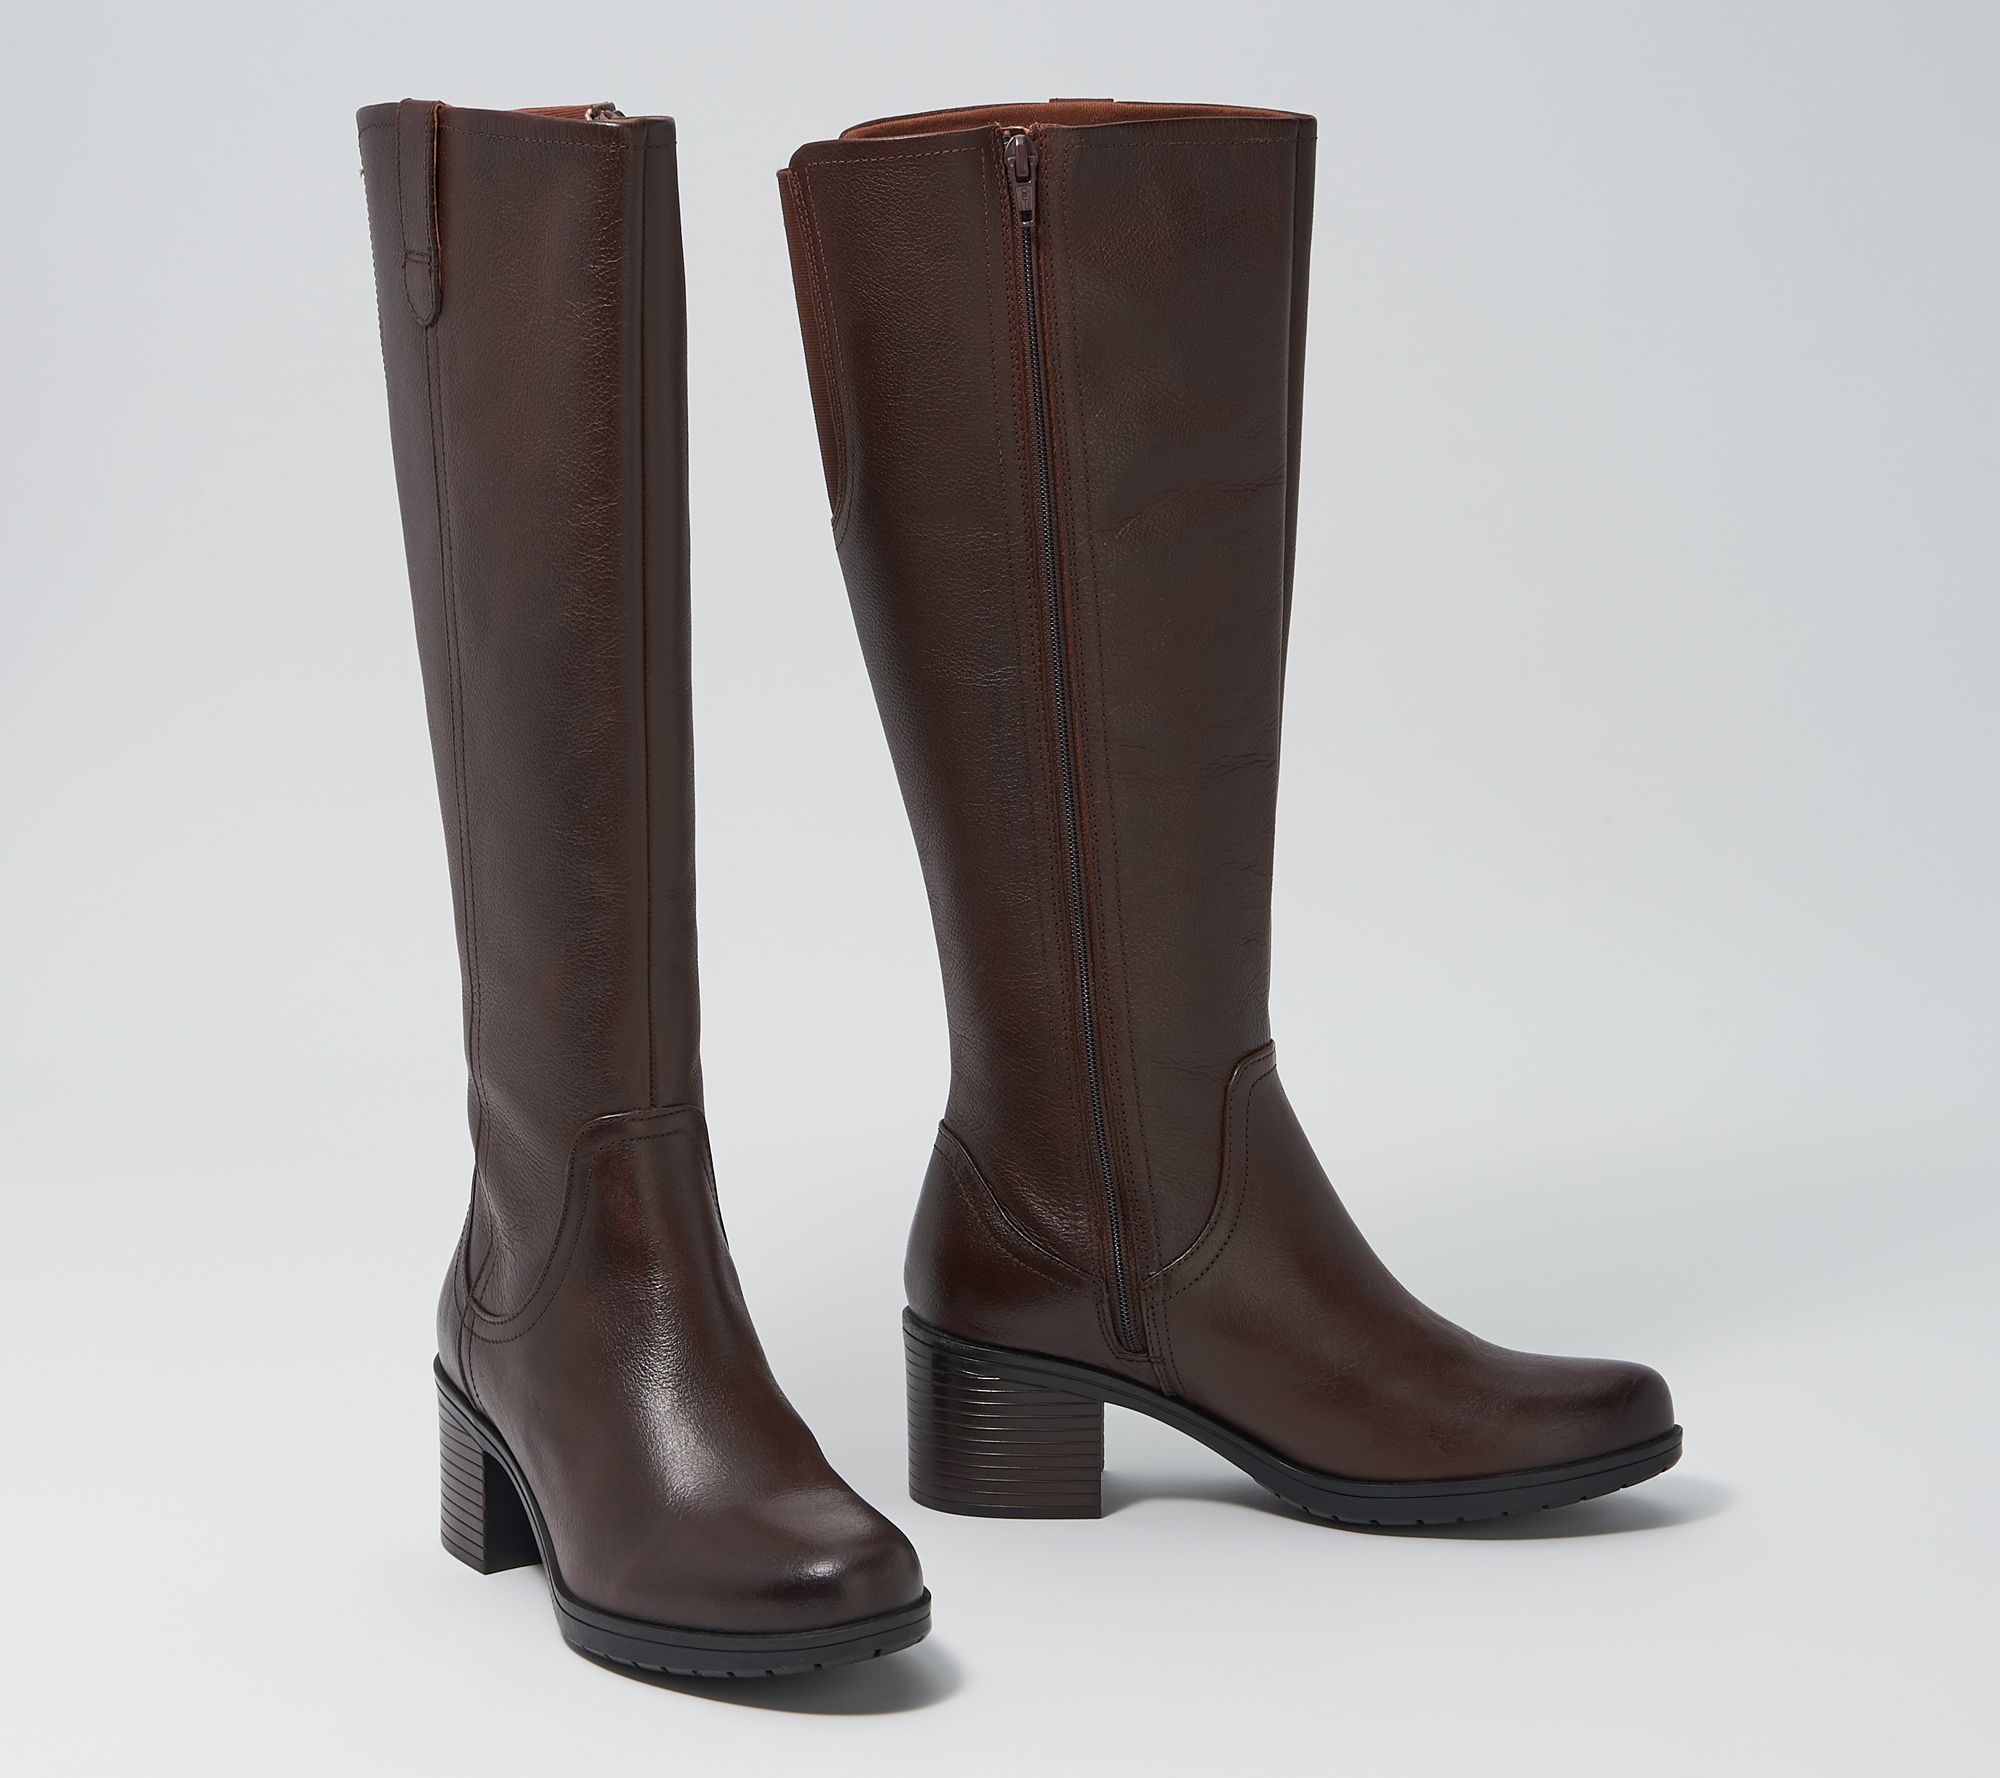 clarks riding boots wide calf